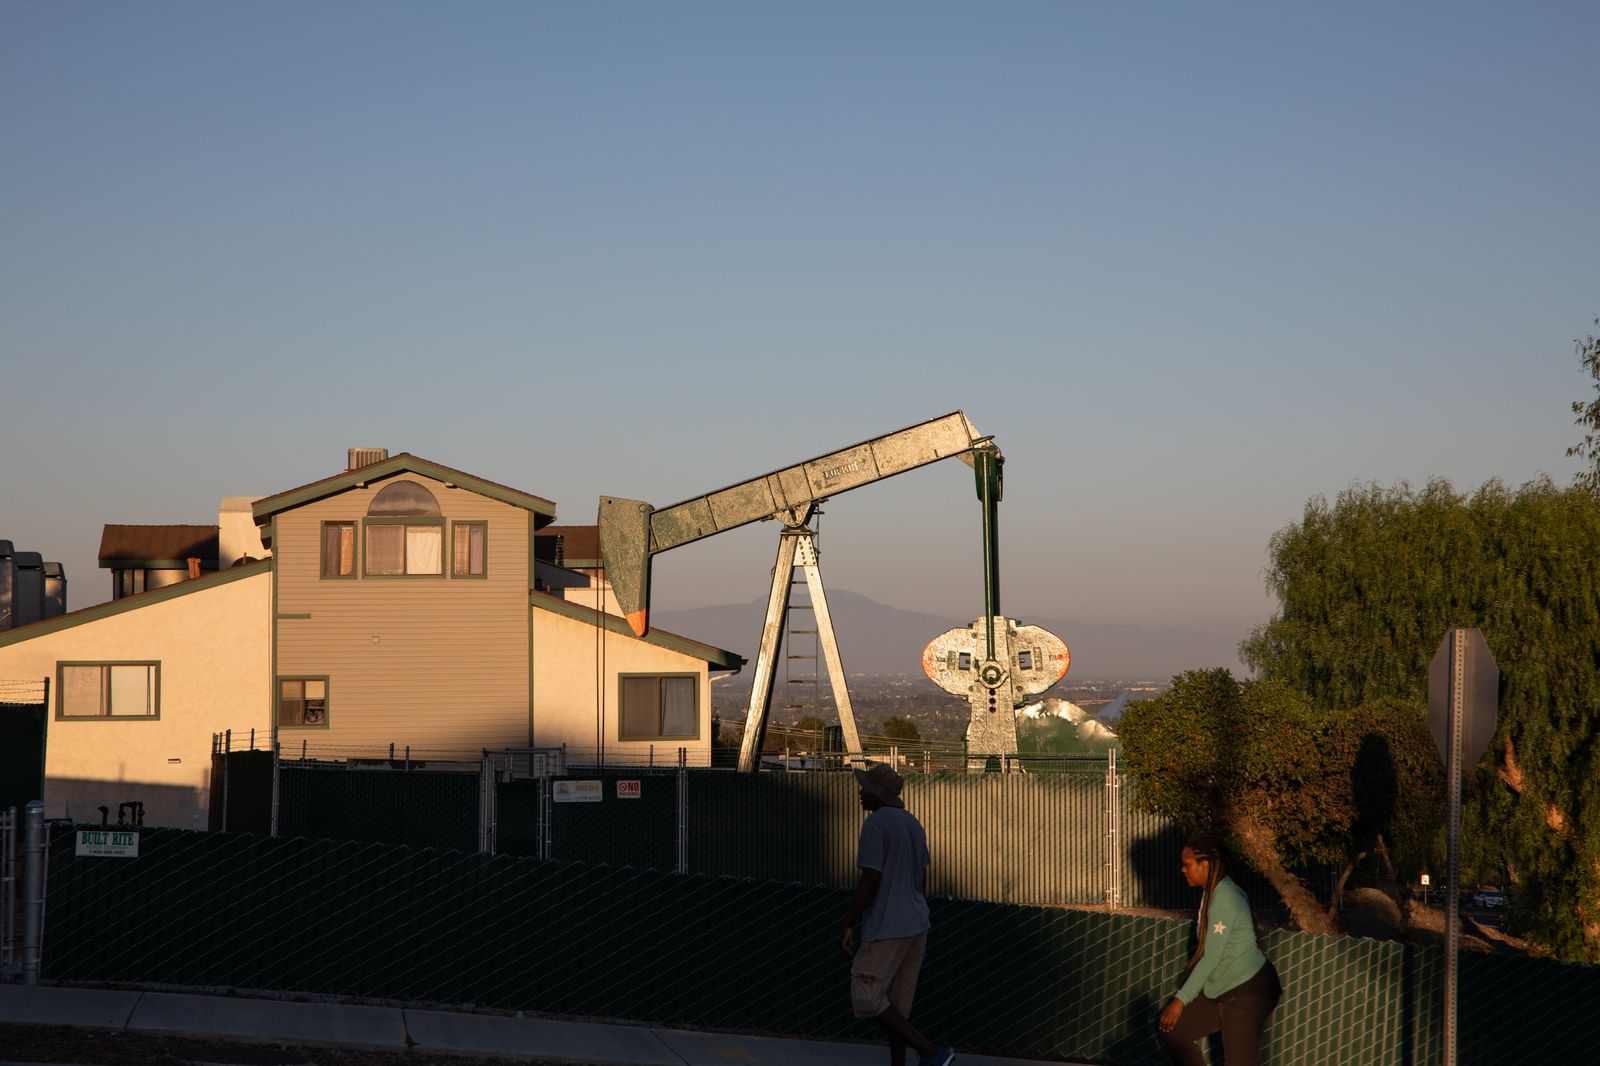 © Tara Pixley - Residents of Signal Hill, a Long Beach suburb, walk its streets in the shadow of dozens of pumping oil jacks.